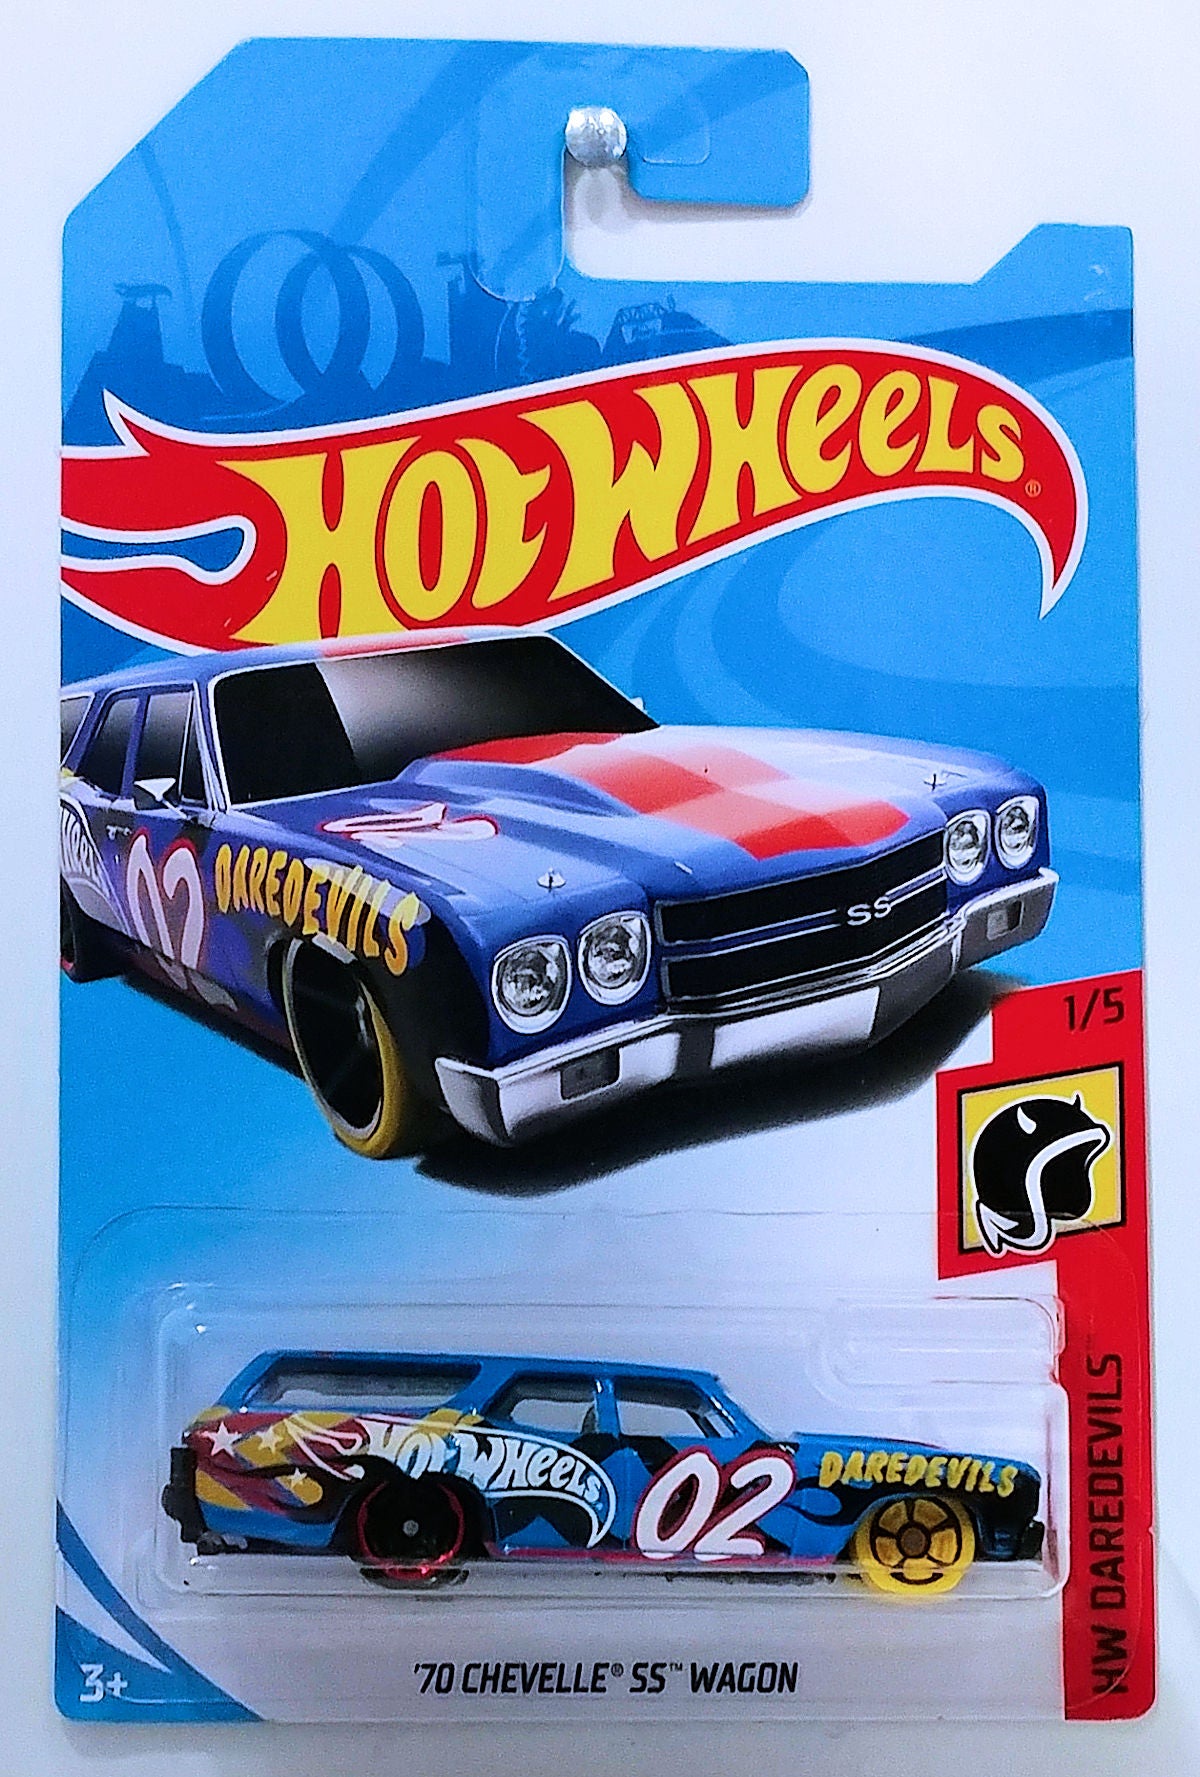 Hot Wheels 2018 - Collector # XXX/365 - HW Daredevils 1/5 - '70 Chevelle SS Wagon - Blue - IC